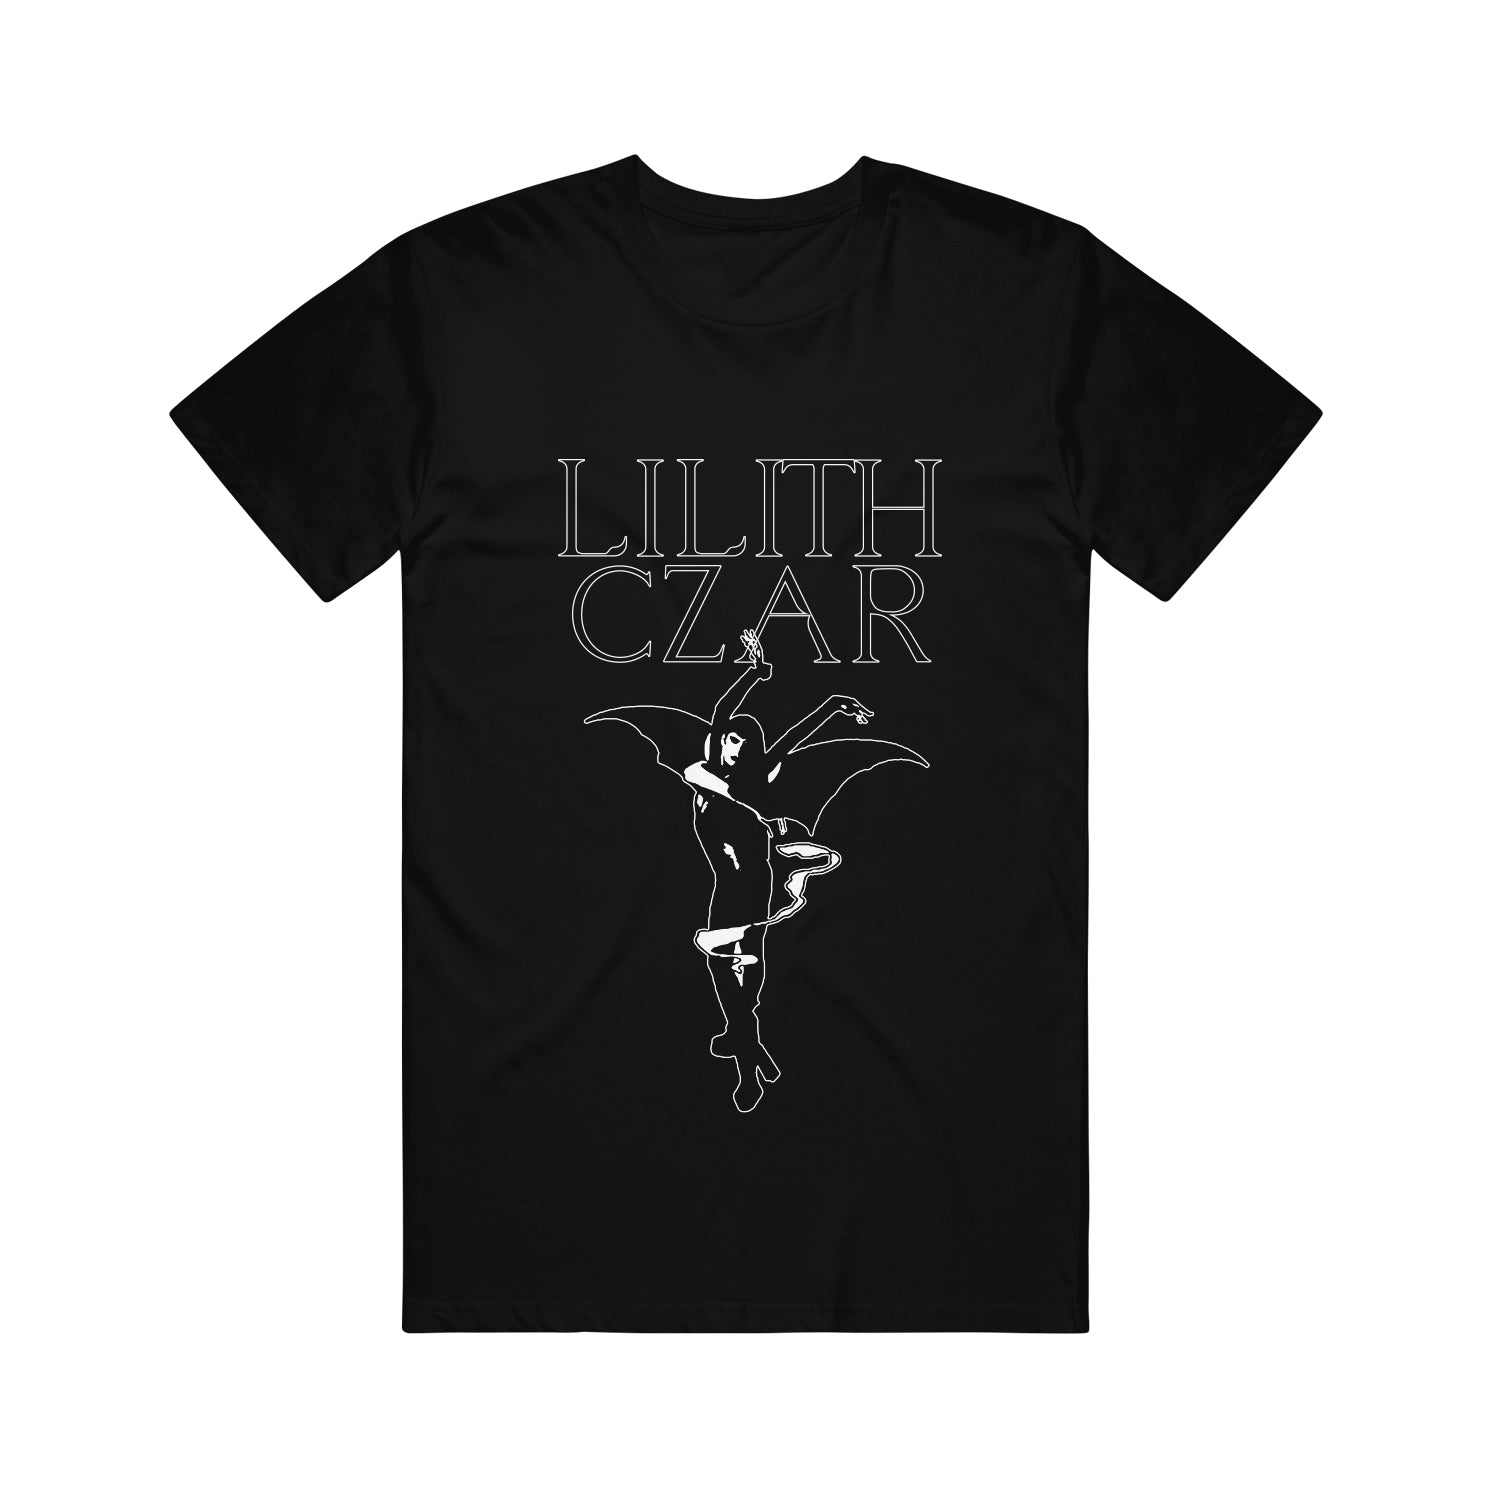 Black tshirt on a white background. The shirt says Lilith Czar in white outlined lettering and below that is an image of a woman with wings, and she looks like she is dancing.